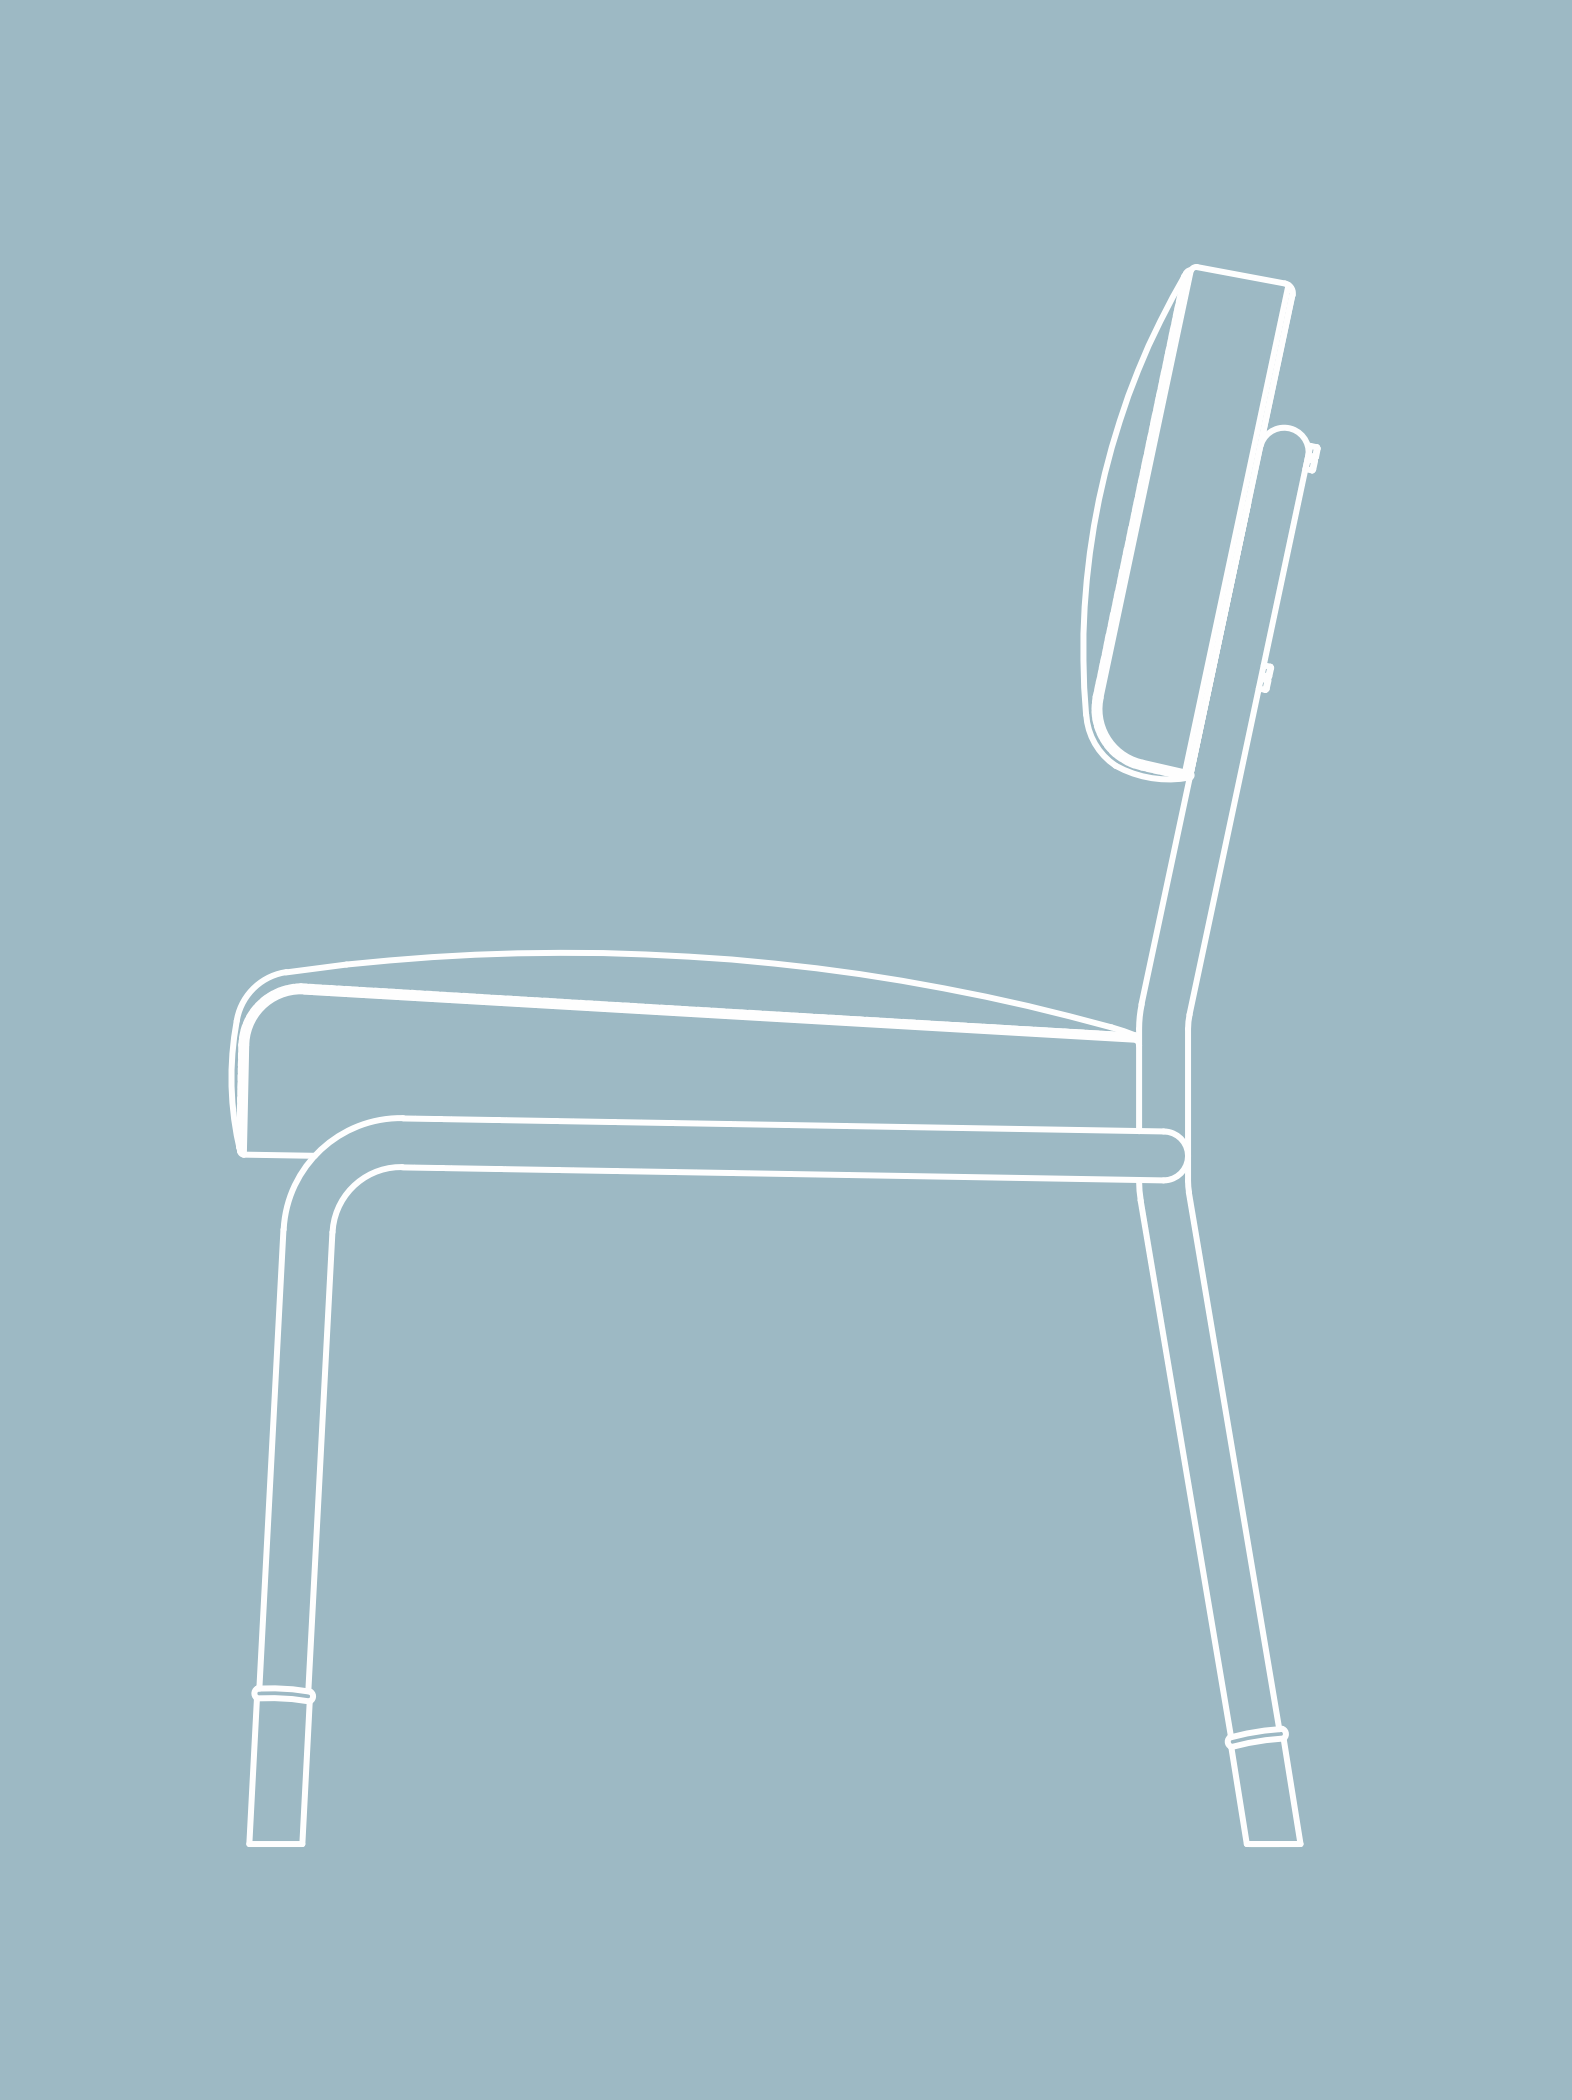 simple chair drawing side view